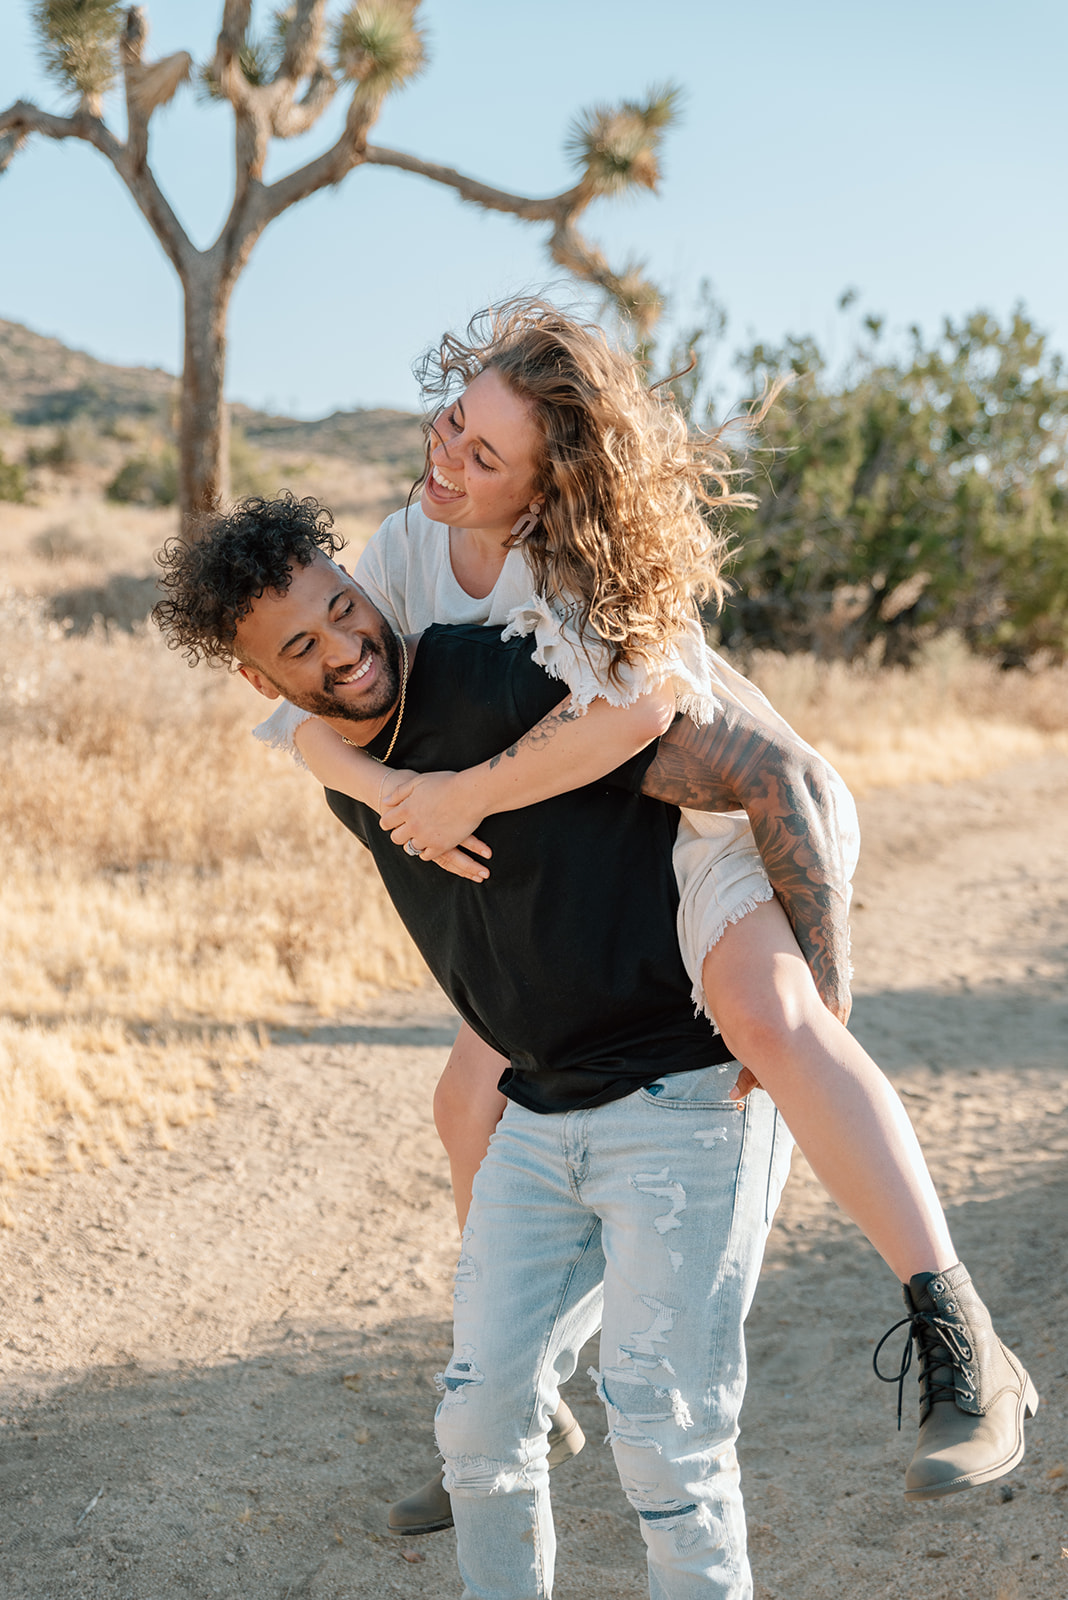 Piggyback ride in the desert during engagement session cactus in the background